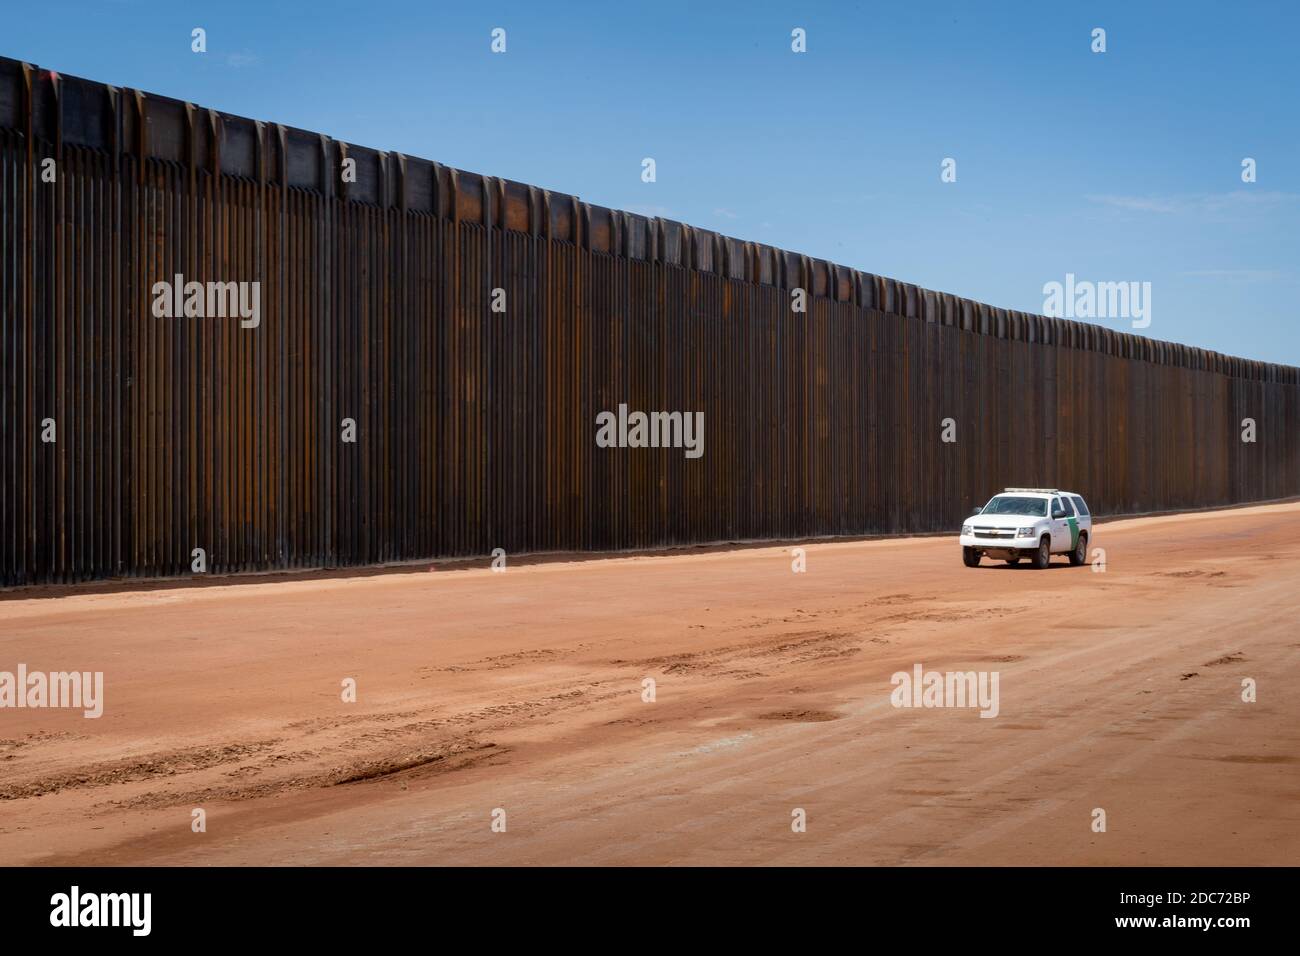 Customs and Border Protection officers patrol a new section of bollard panels along the Tucson Sector of the U.S. - Mexican border wall, known at the Trump Wall August 12, 2020 near Naco, Arizona. Stock Photo